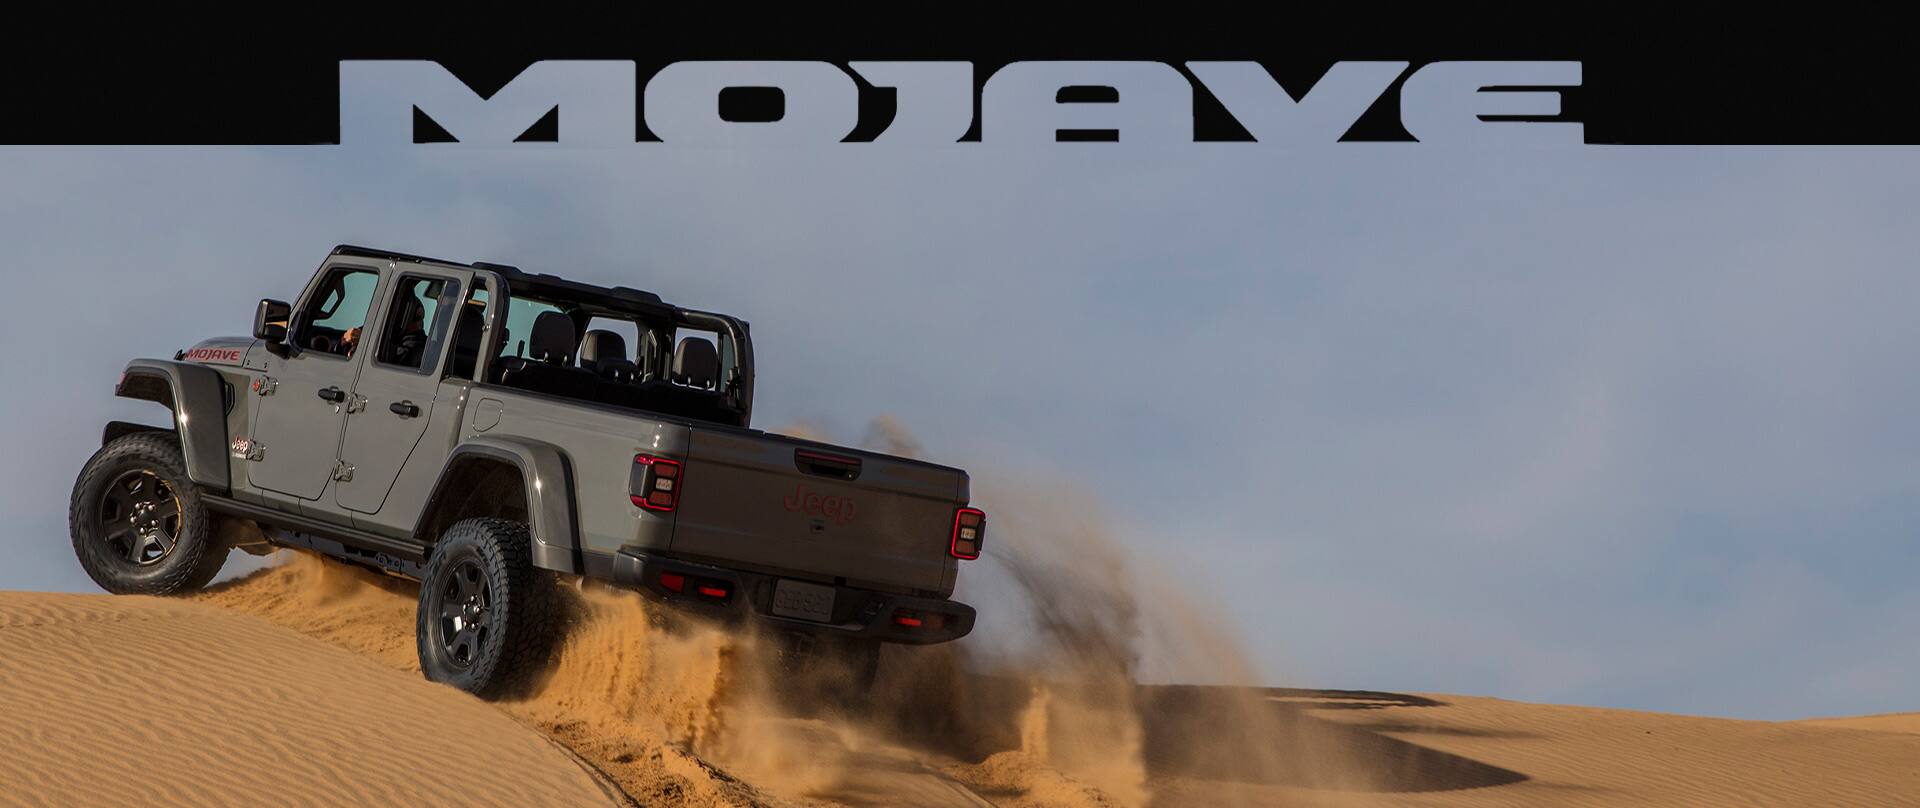 Mojave. The 2022 Jeep Gladiator Mojave being driven on sandy terrain, with dust clouds rising from its wheels.